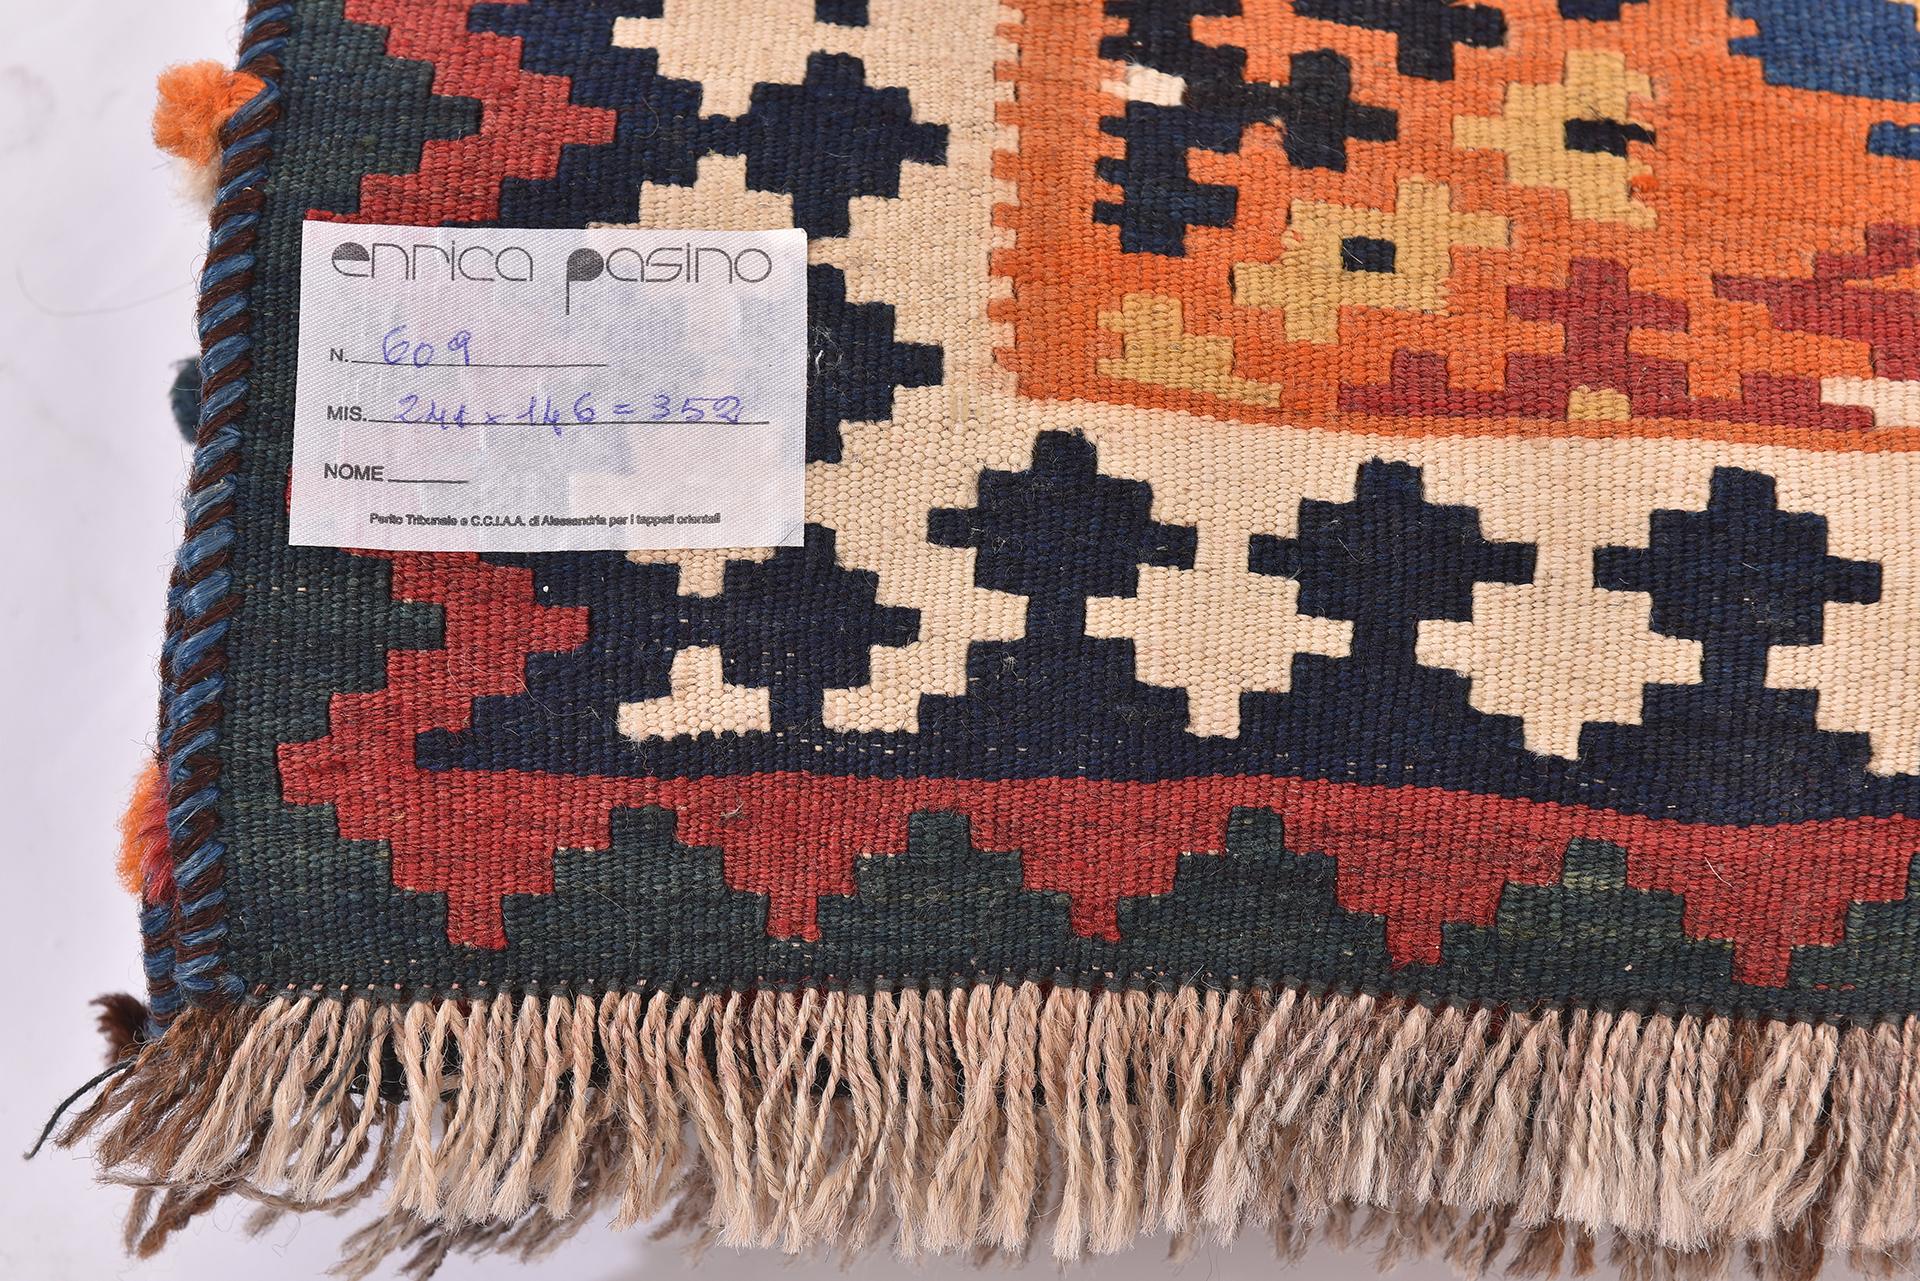 nr. 609 - Very pleasant kilim, with a èerfect workmanship, with shades of light- blue and blue: such special colors obtained with the indigo  substance .  Dense and accurate workmanship.
Now with a very good price for closing activities.